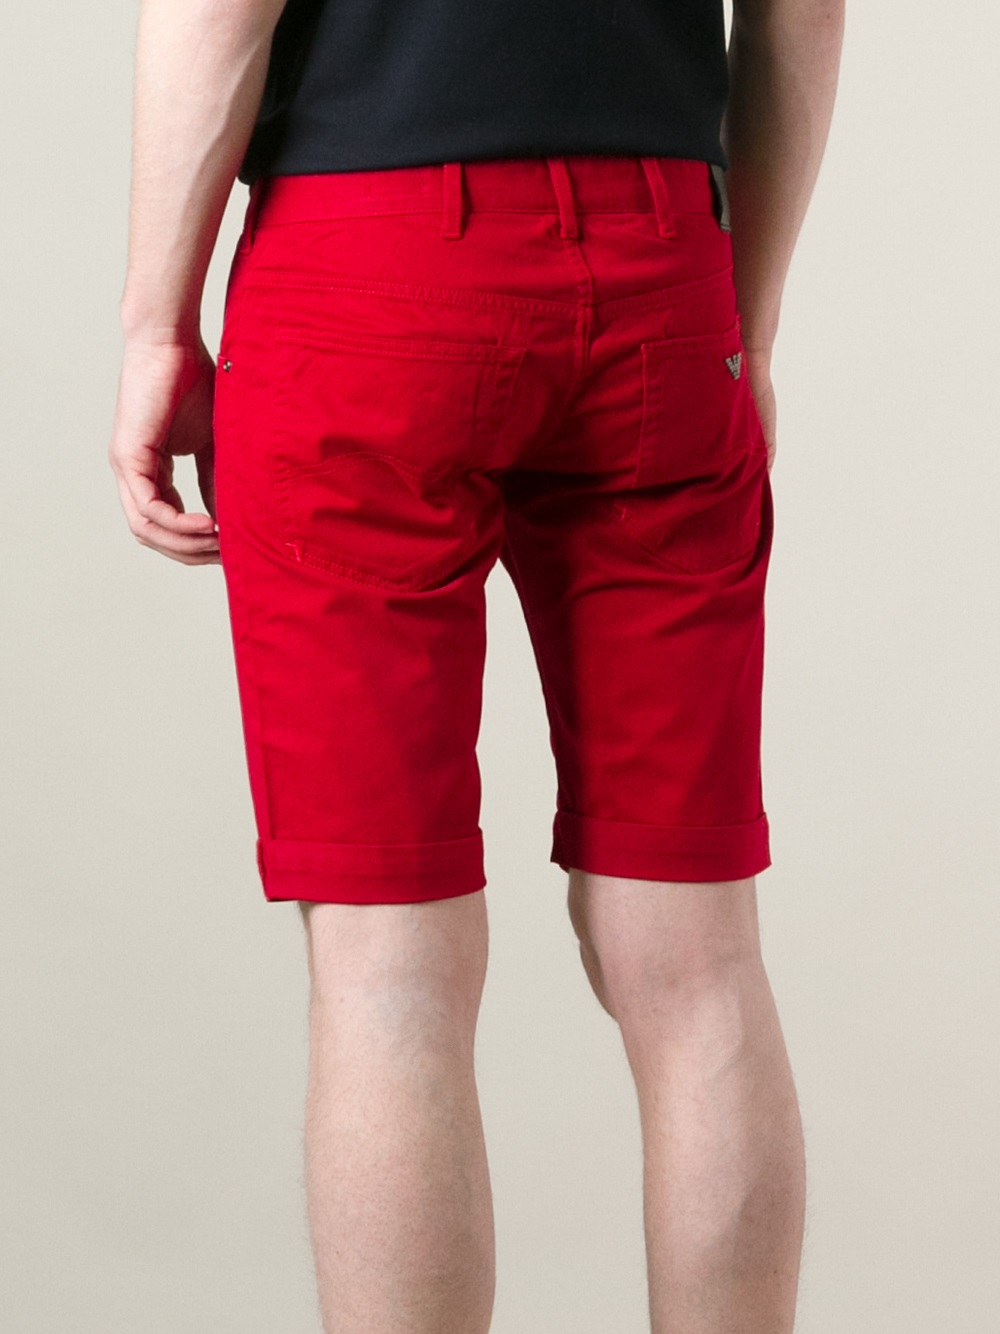 Armani Jeans Denim Shorts in Red for Men - Lyst